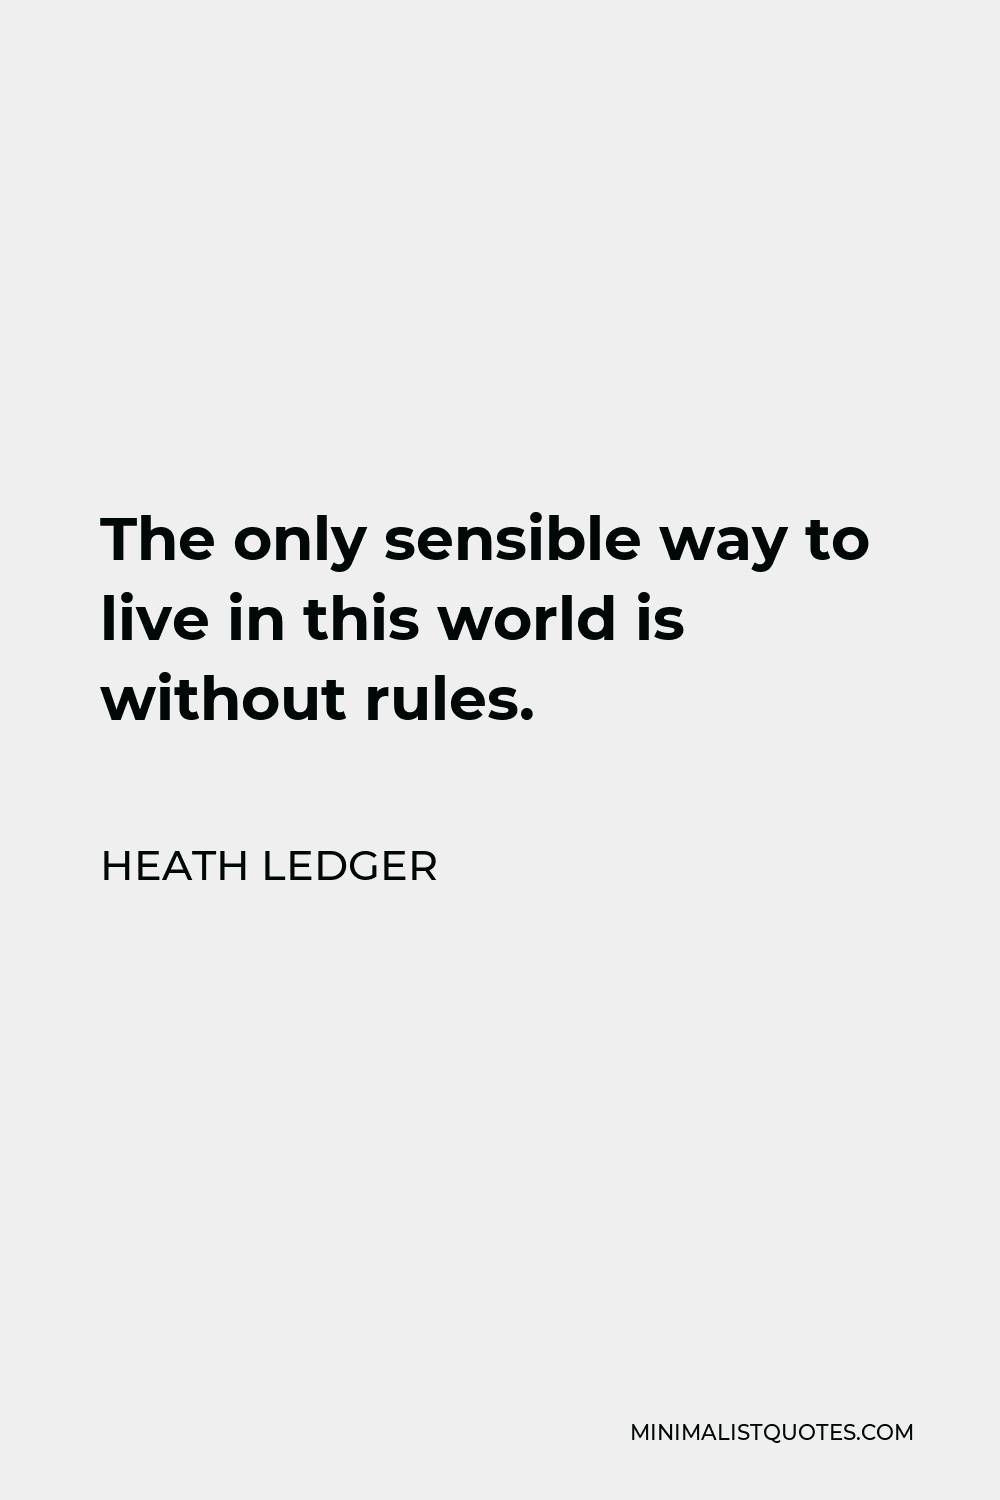 Heath Ledger Quote - The only sensible way to live in this world is without rules.